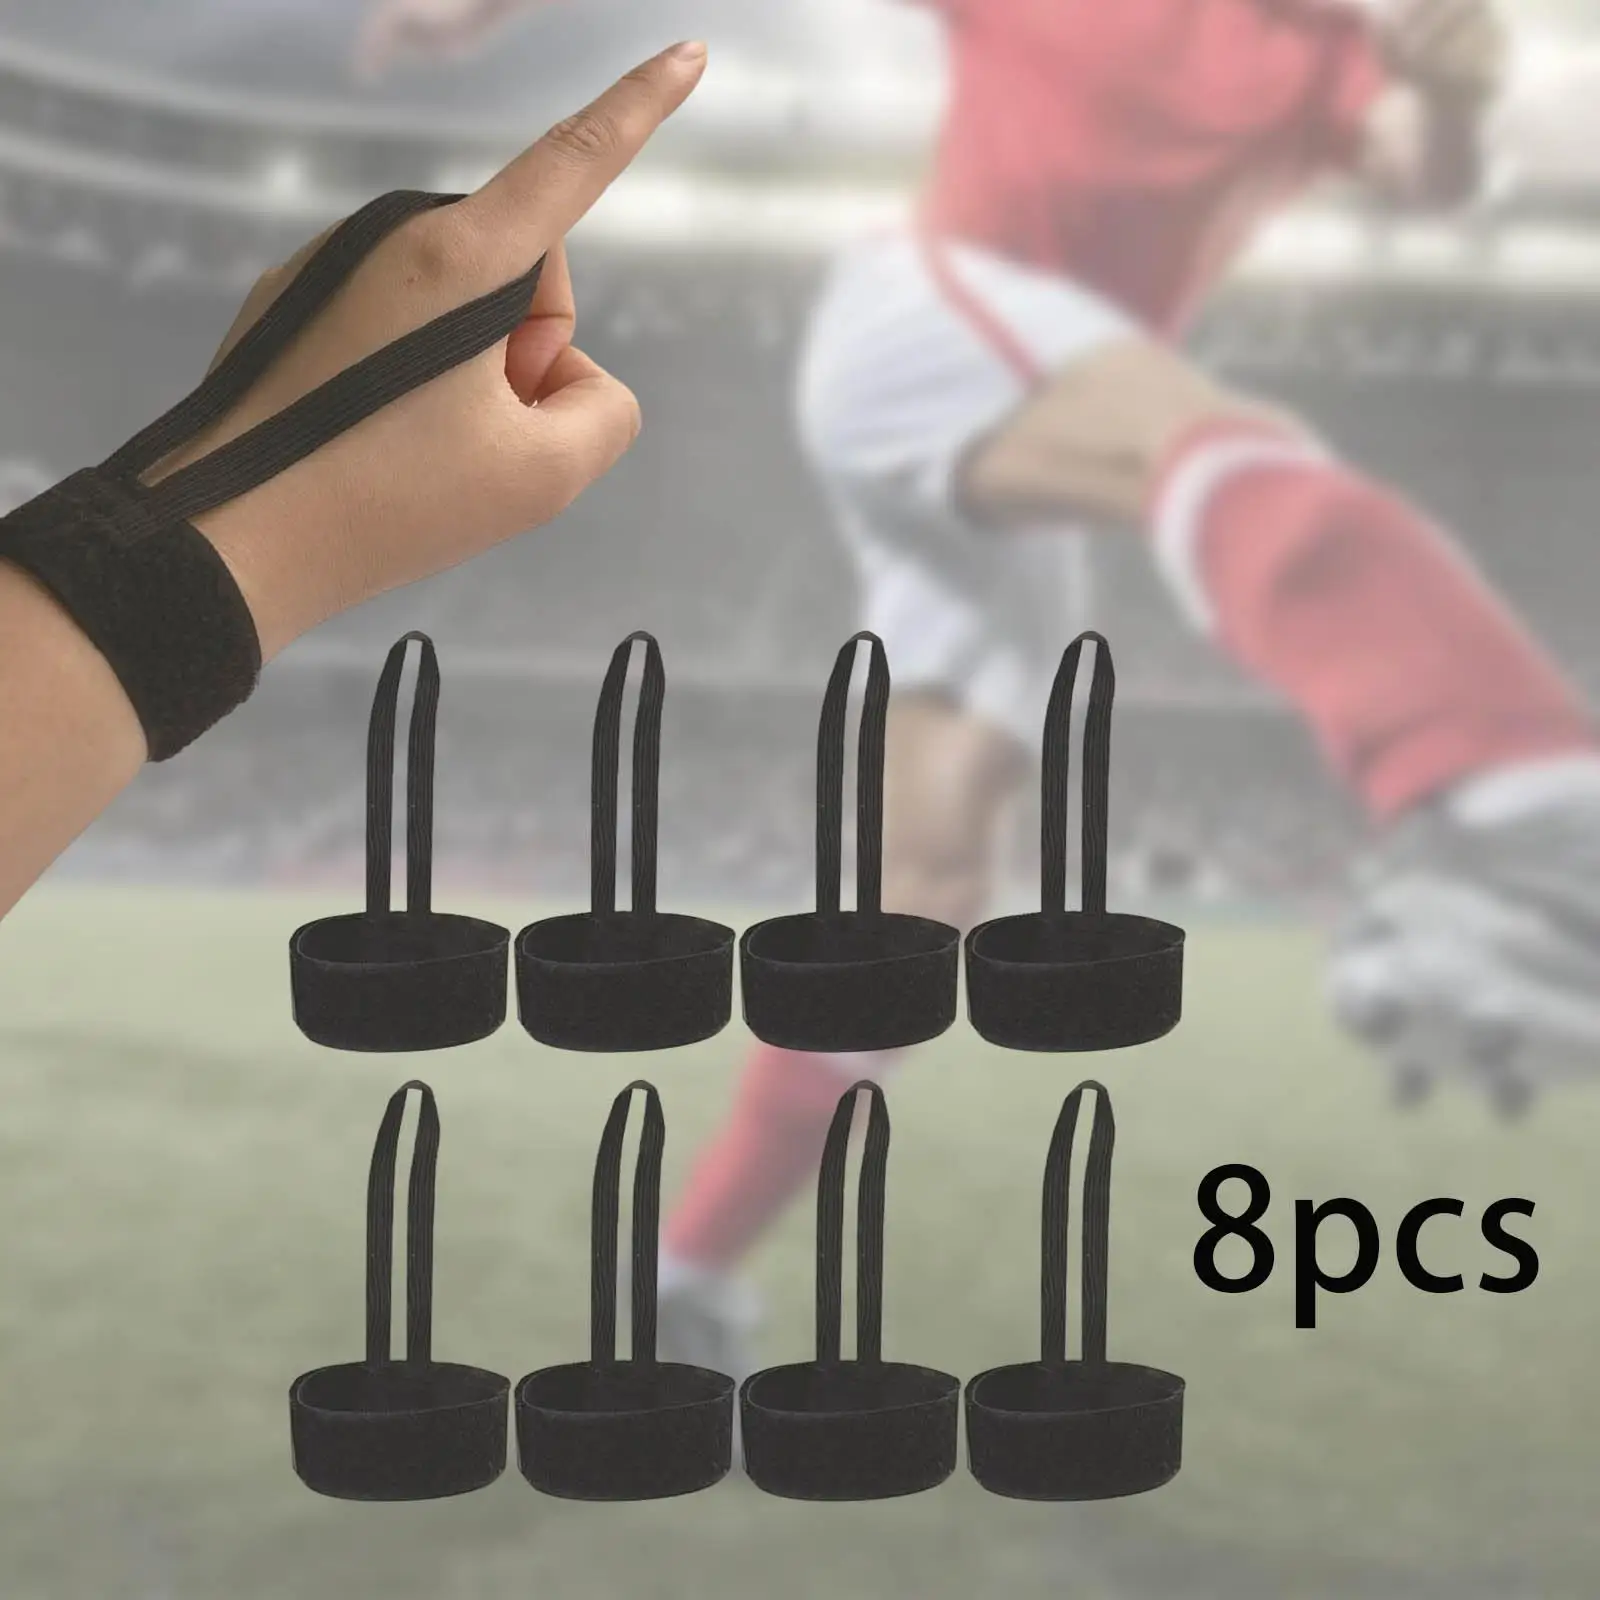 

8x Football Down Indicator Wrist Football Referee Gear Breathable Comfortable Referee Wristbands for Match Pracitce Accessories